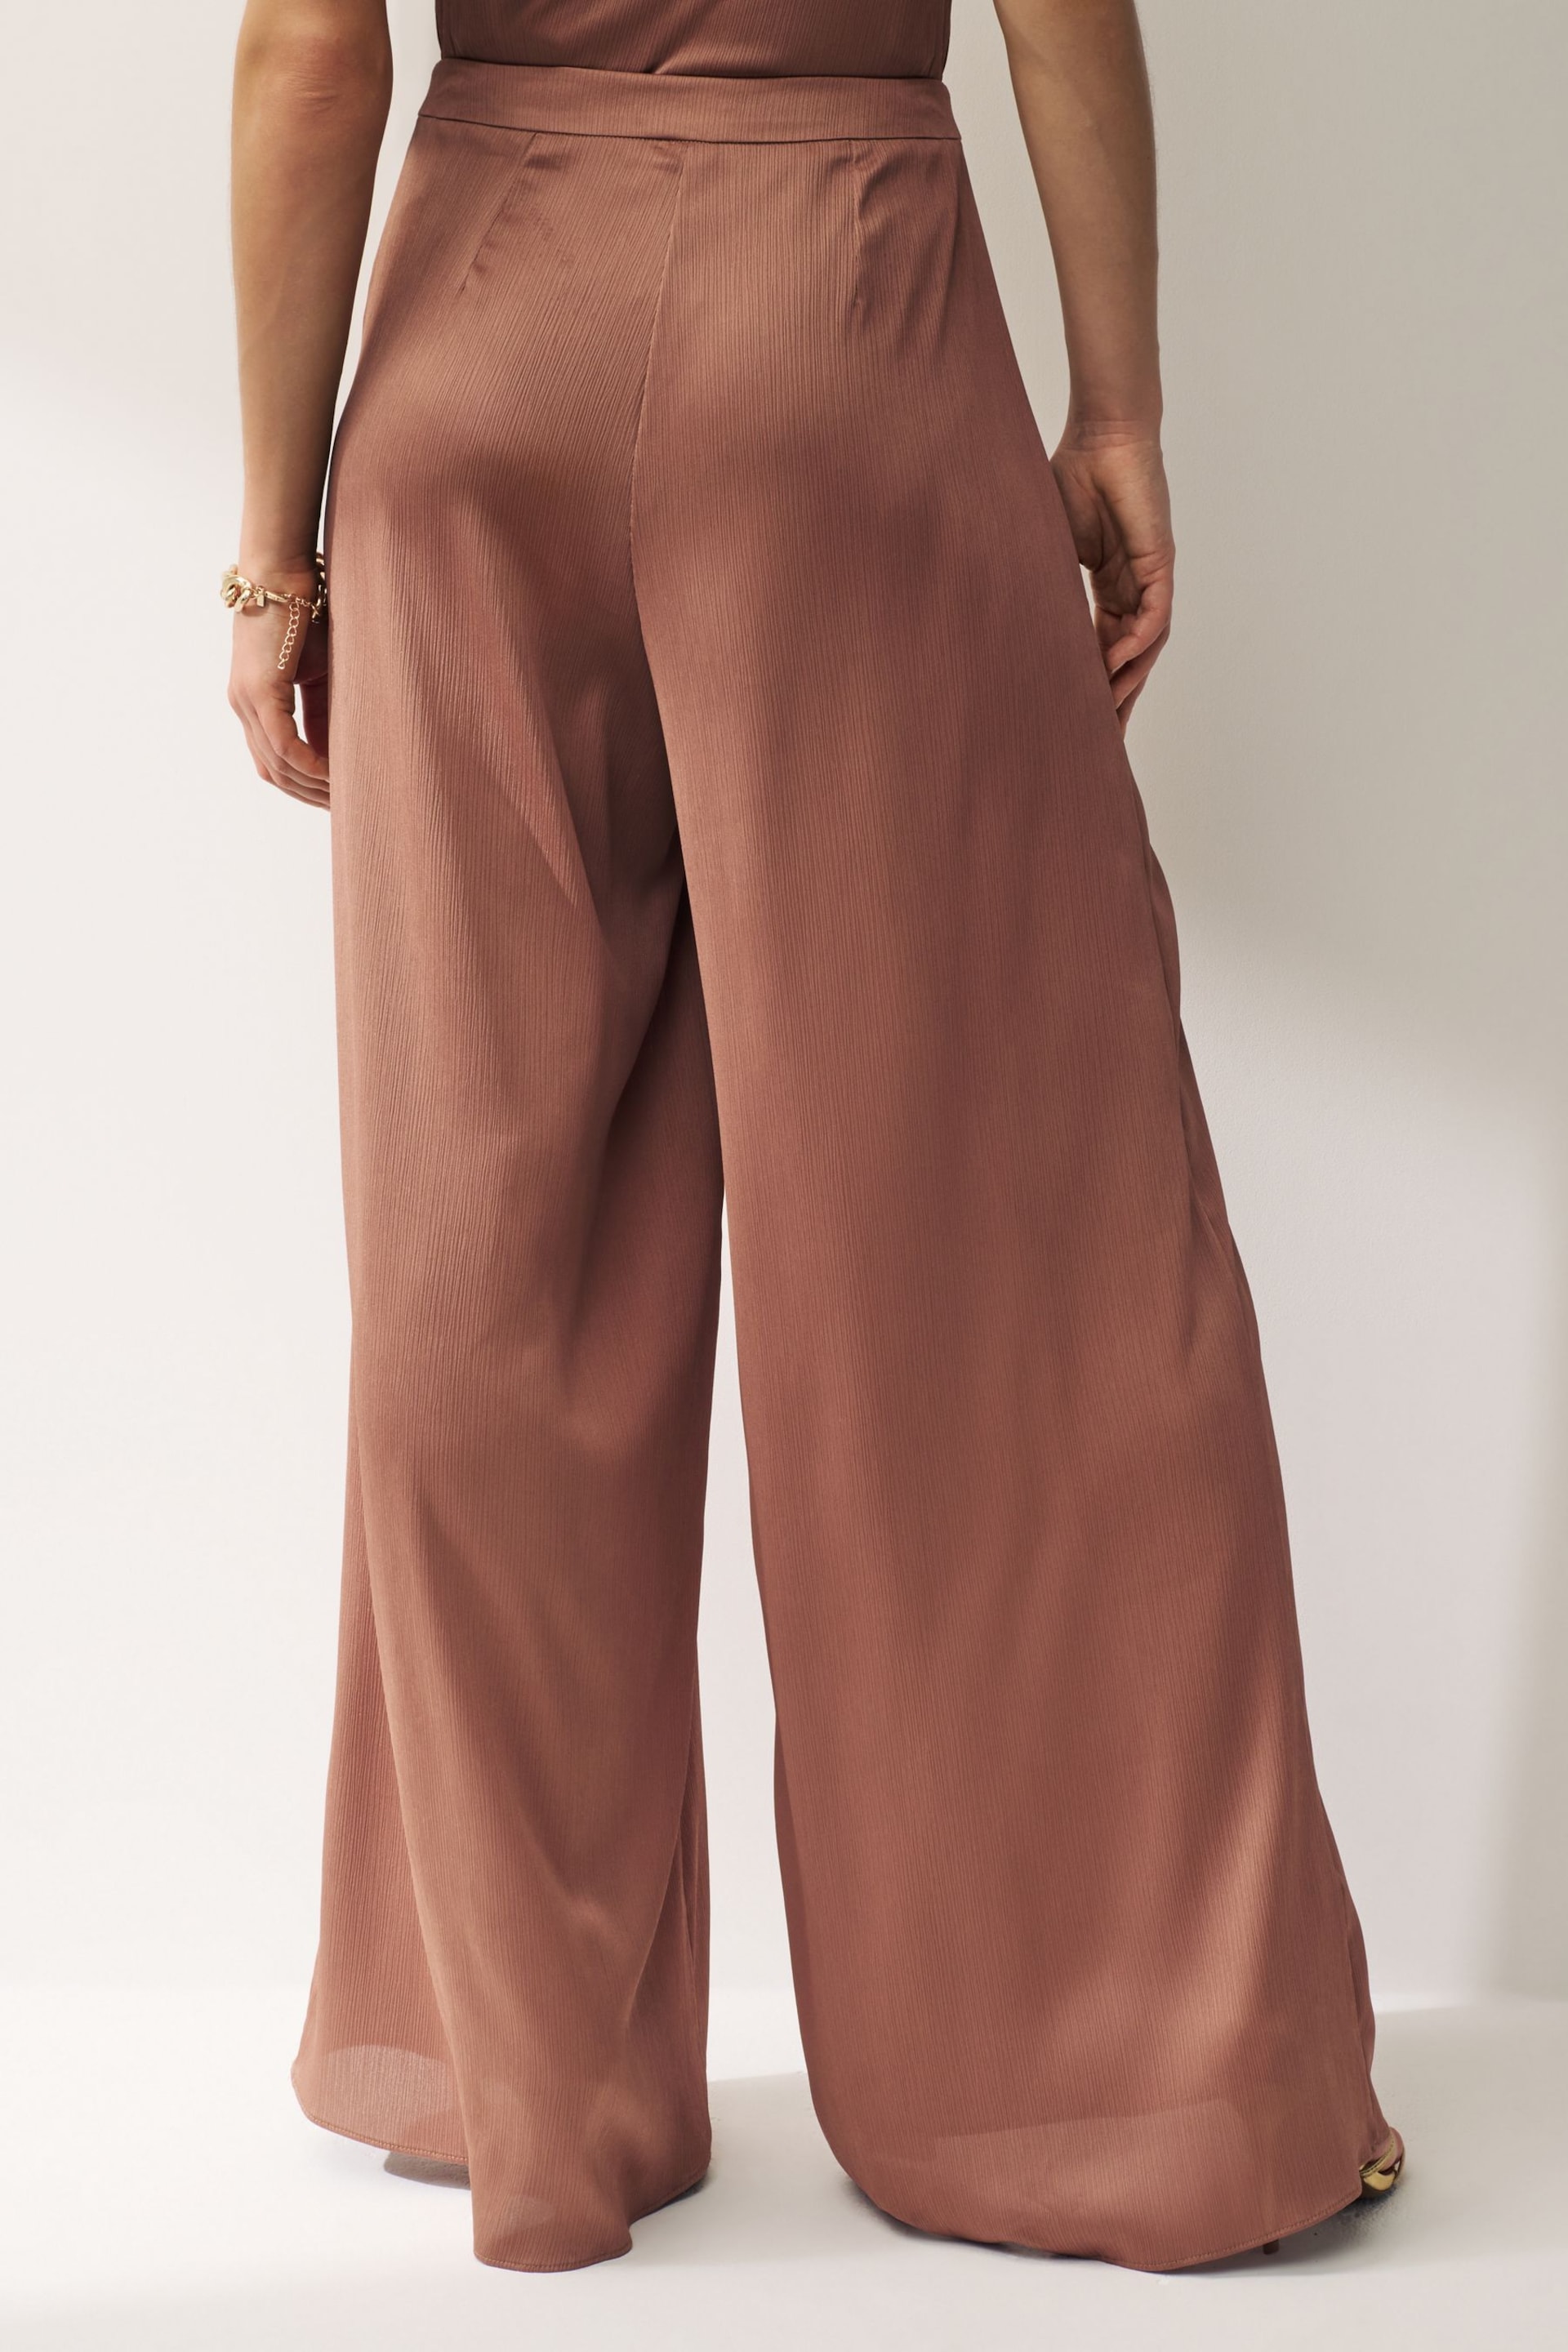 Emme Marella Eretto Wide Leg Satin Brown Trousers - Image 2 of 2